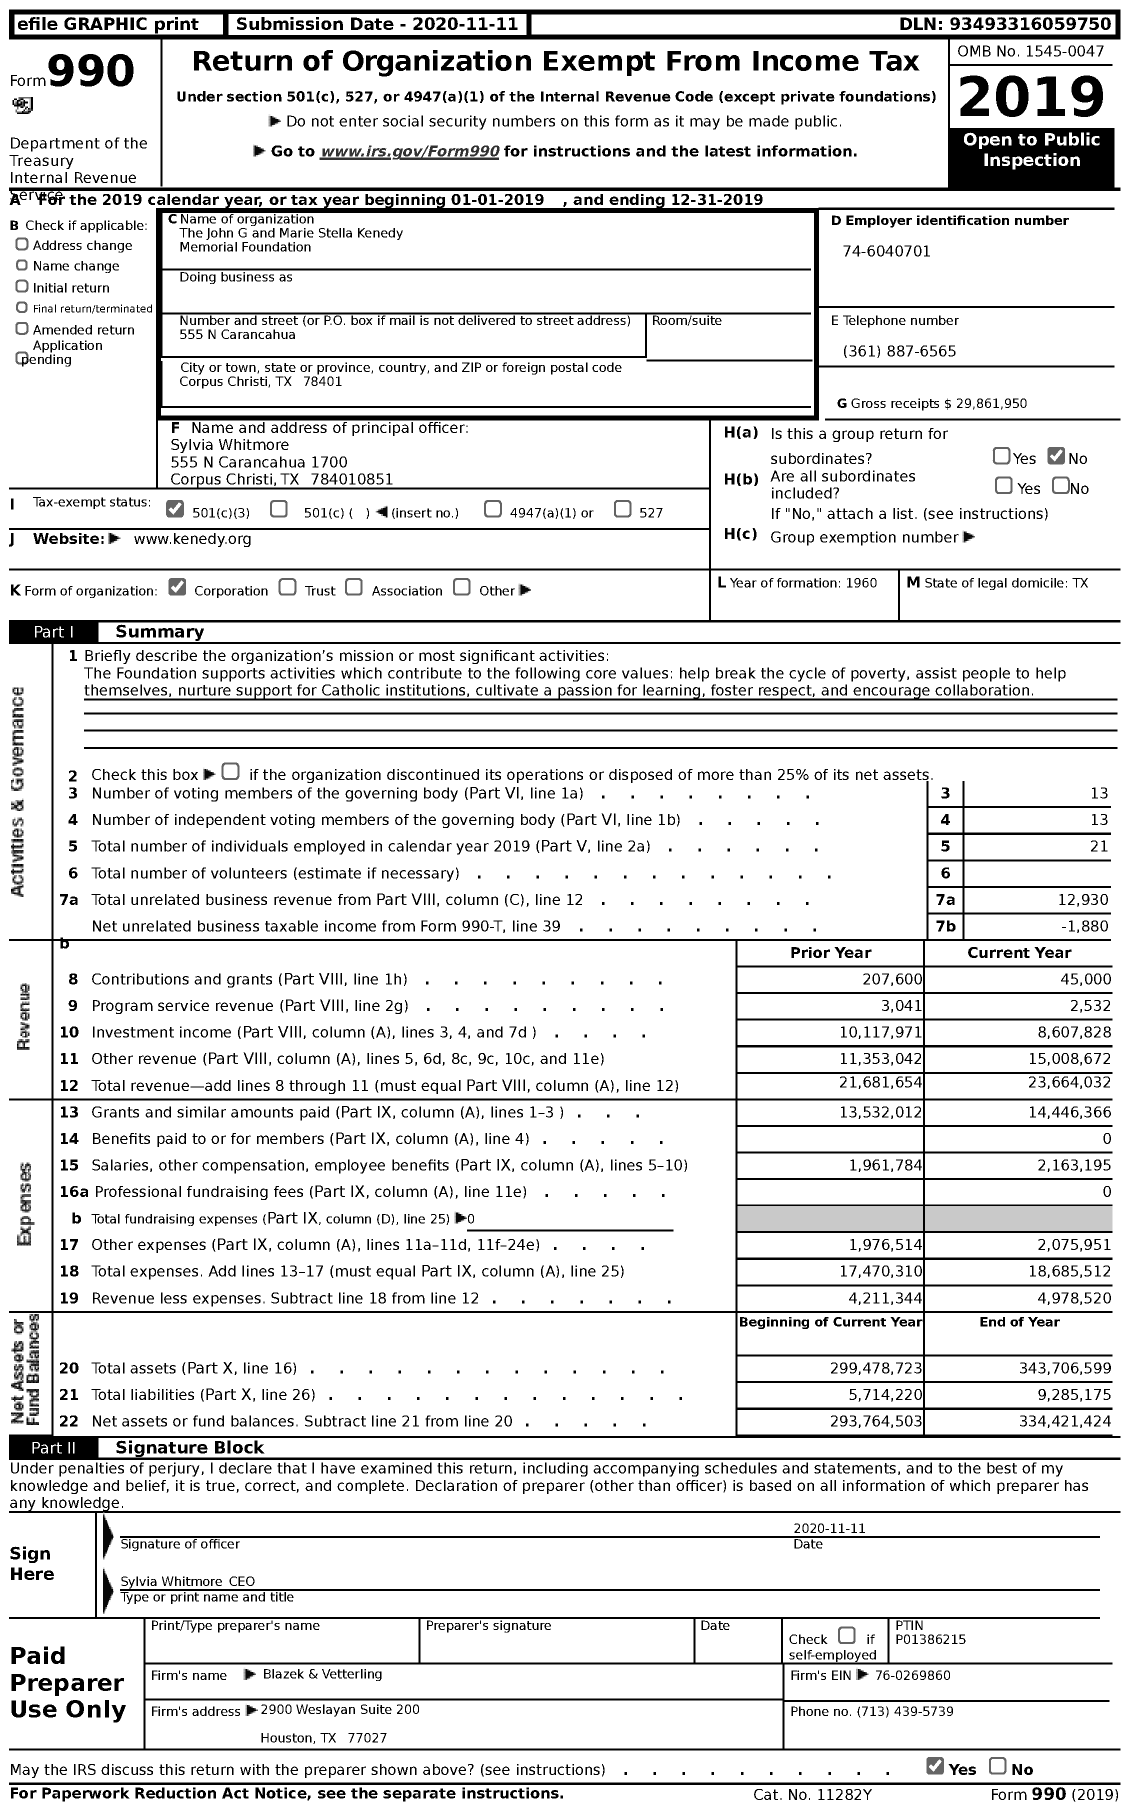 Image of first page of 2019 Form 990 for John G. & Marie Stella Kenedy Memorial Foundation